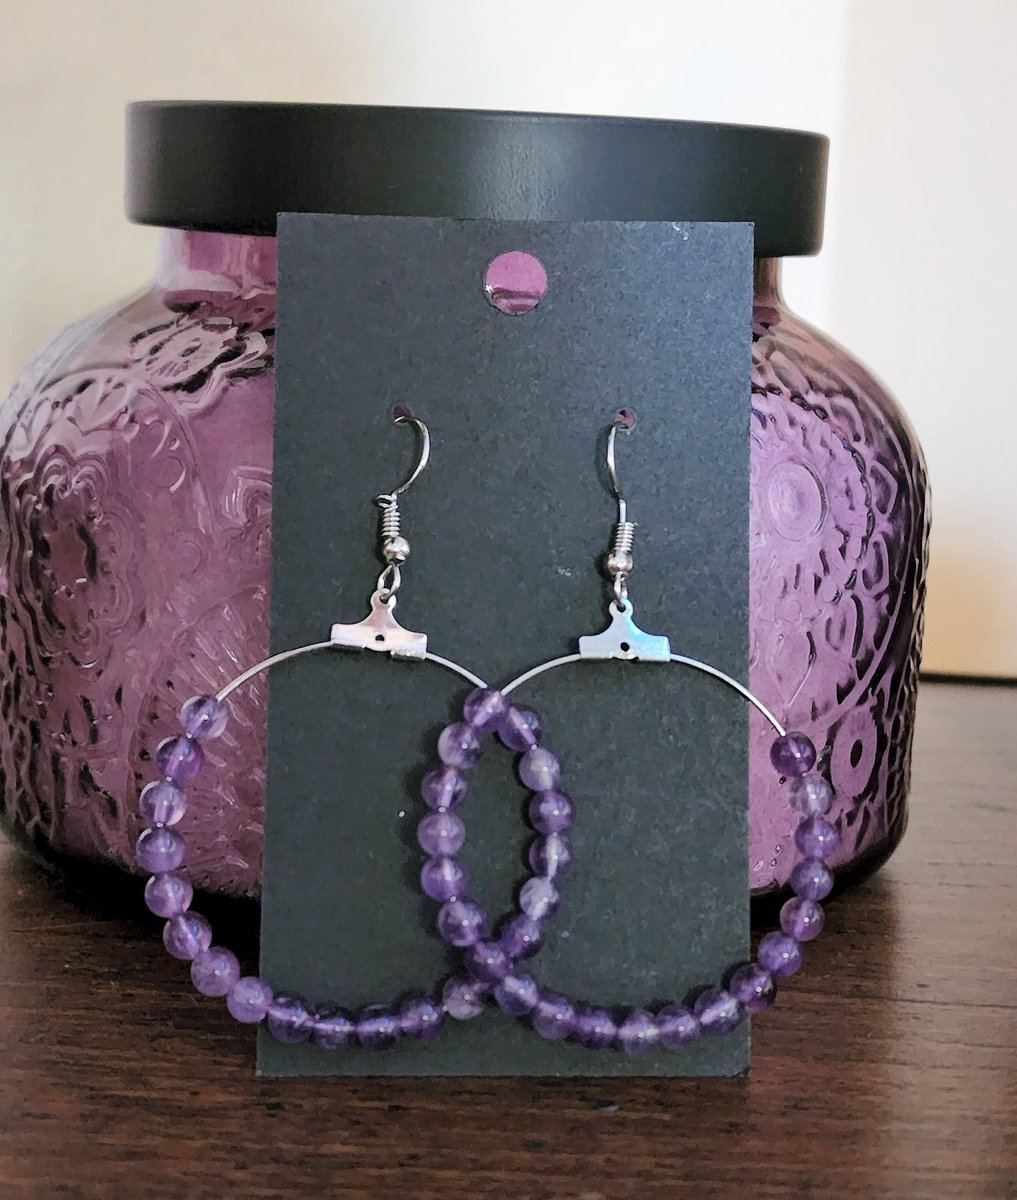 Excited to share the latest addition to my #etsy shop: Amethyst Beaded Earrings etsy.me/3GPVnDT #purple #circle #amethyst #unisexadults #earlobe #purpleearrings #hoopearrings #amethystearrings #purplehoopearrings #love2jewelry